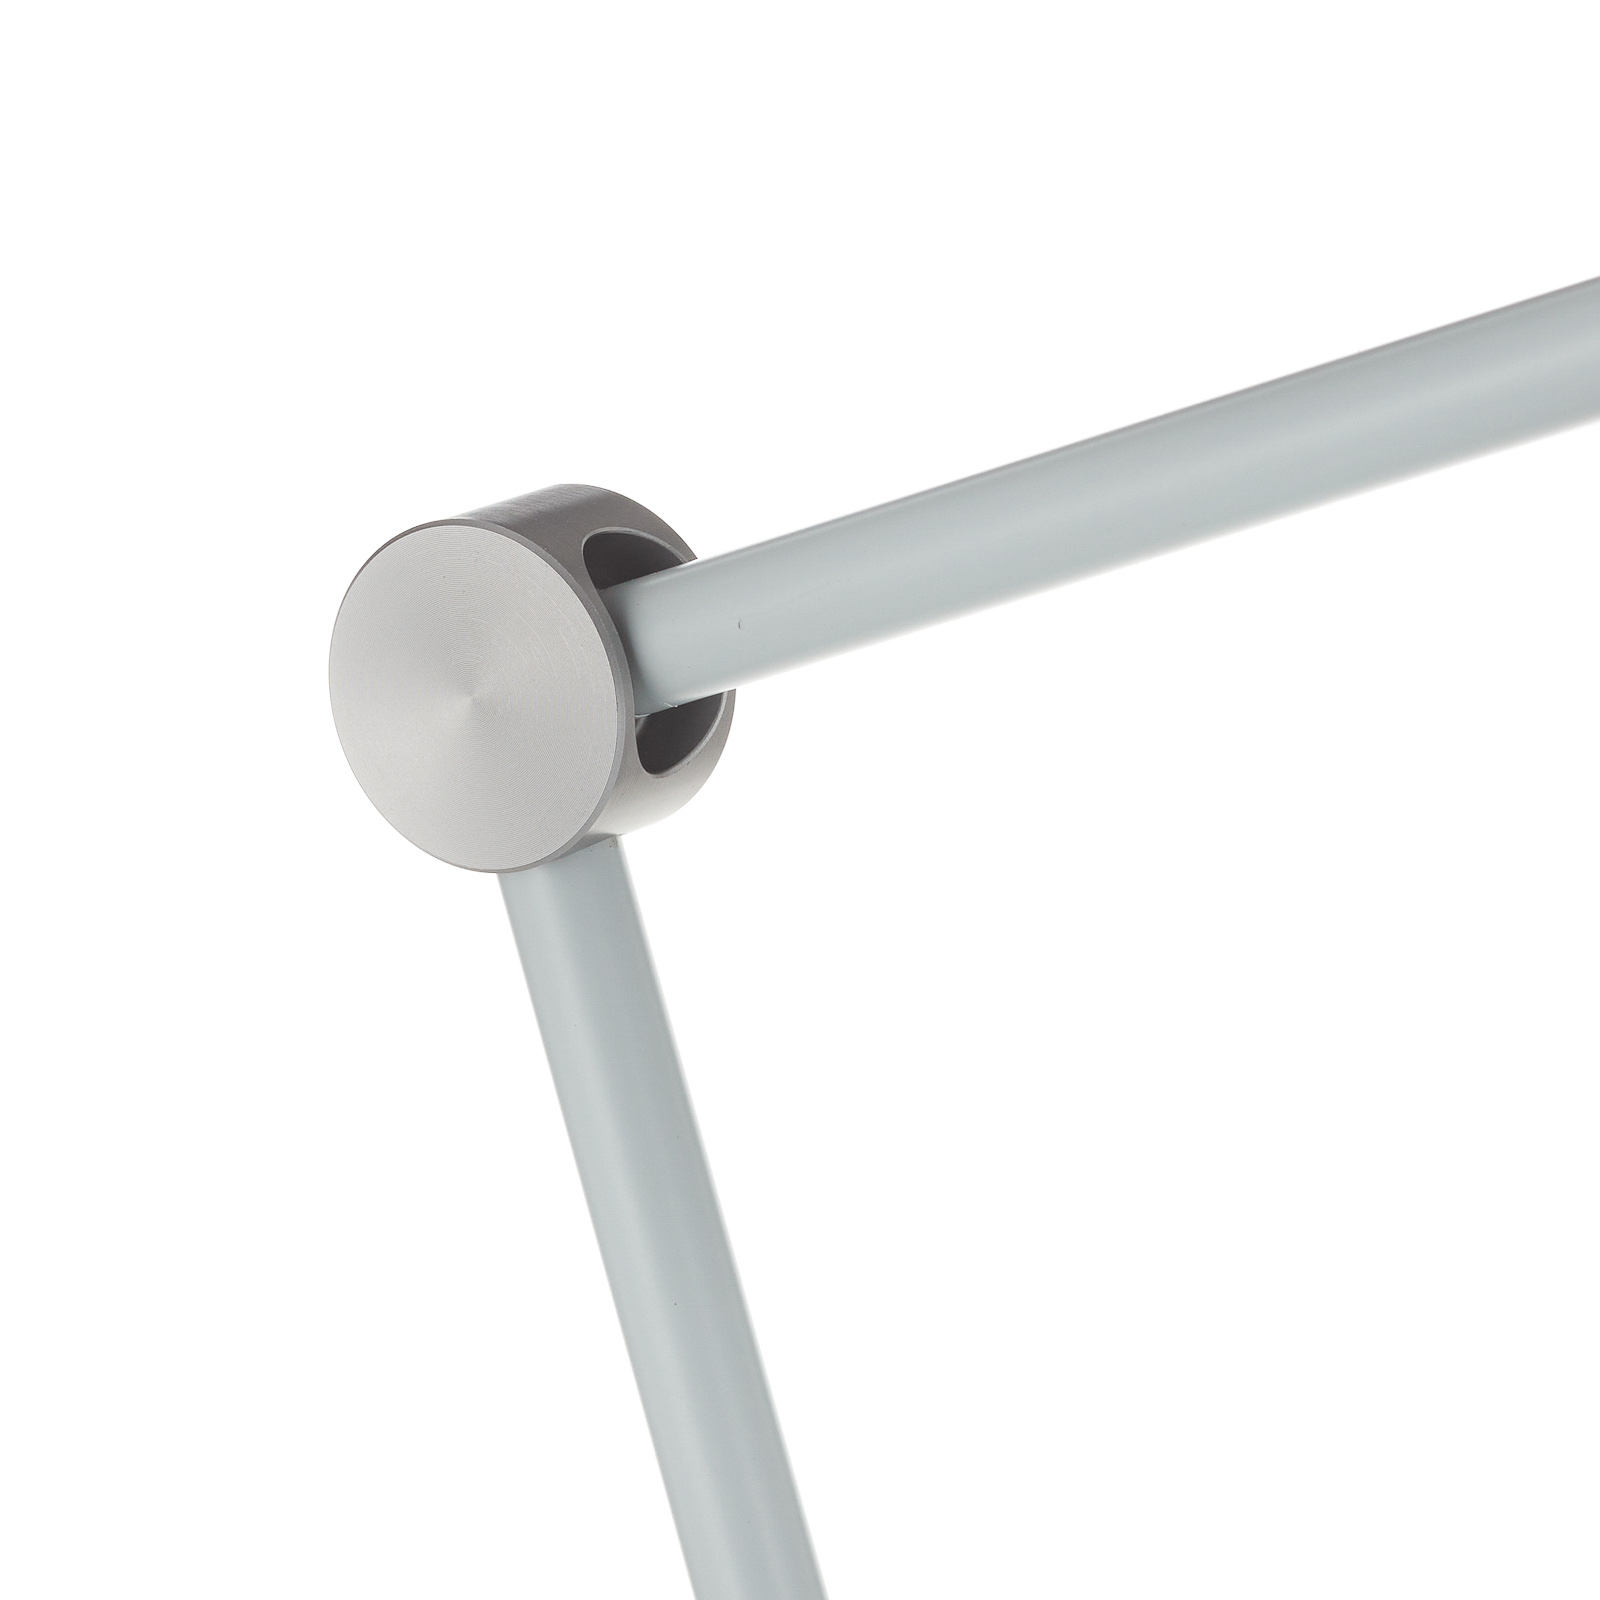 Anglepoise Type 80 lampe à poser, gris brume